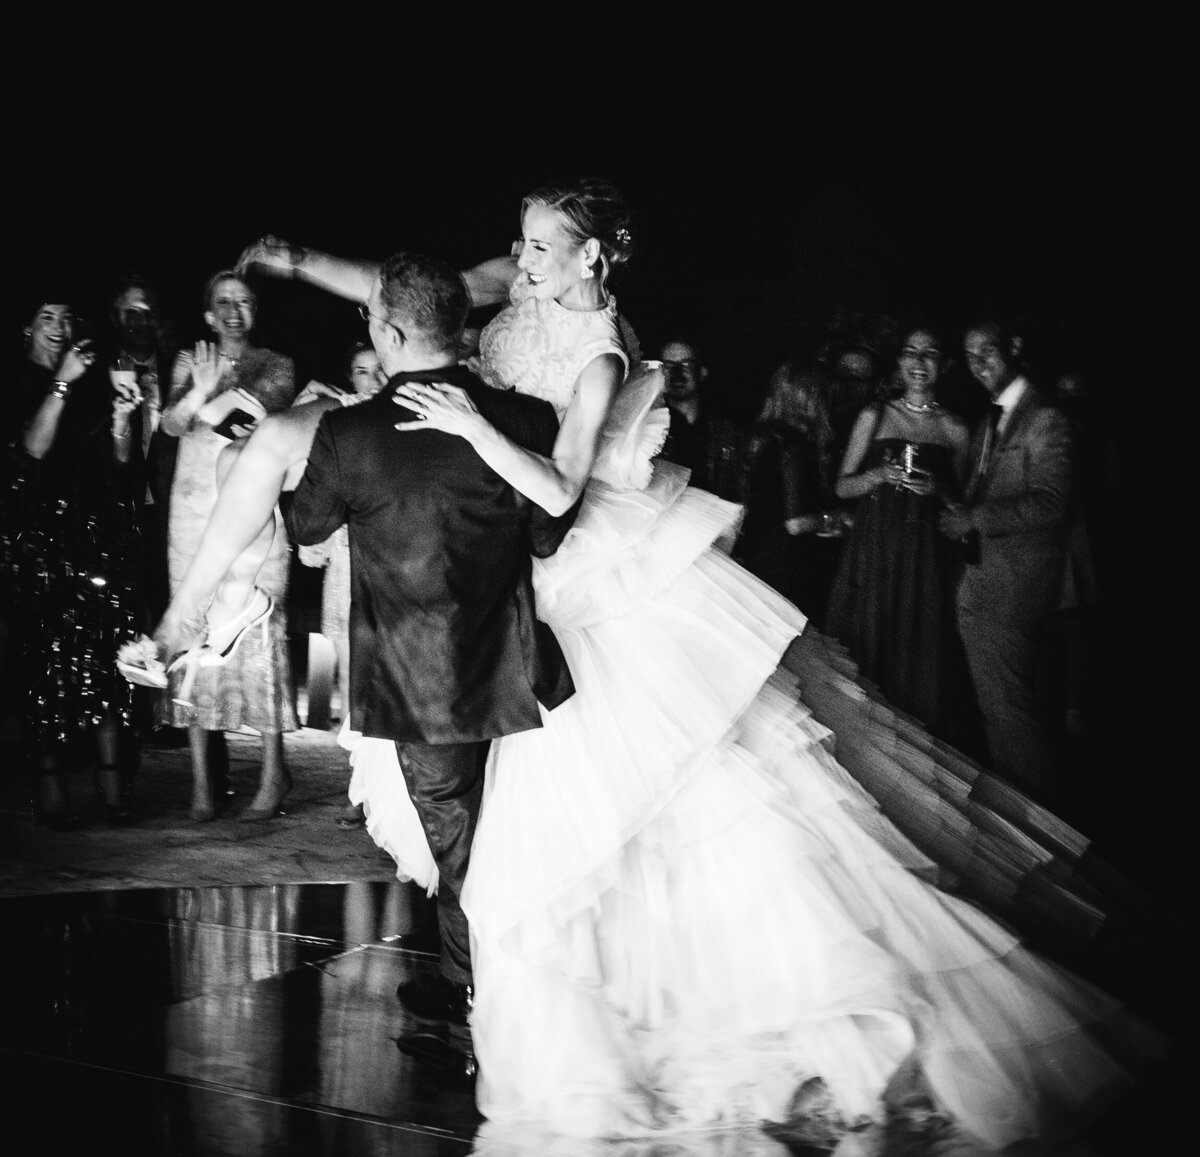 wedding couple dancing at reception party